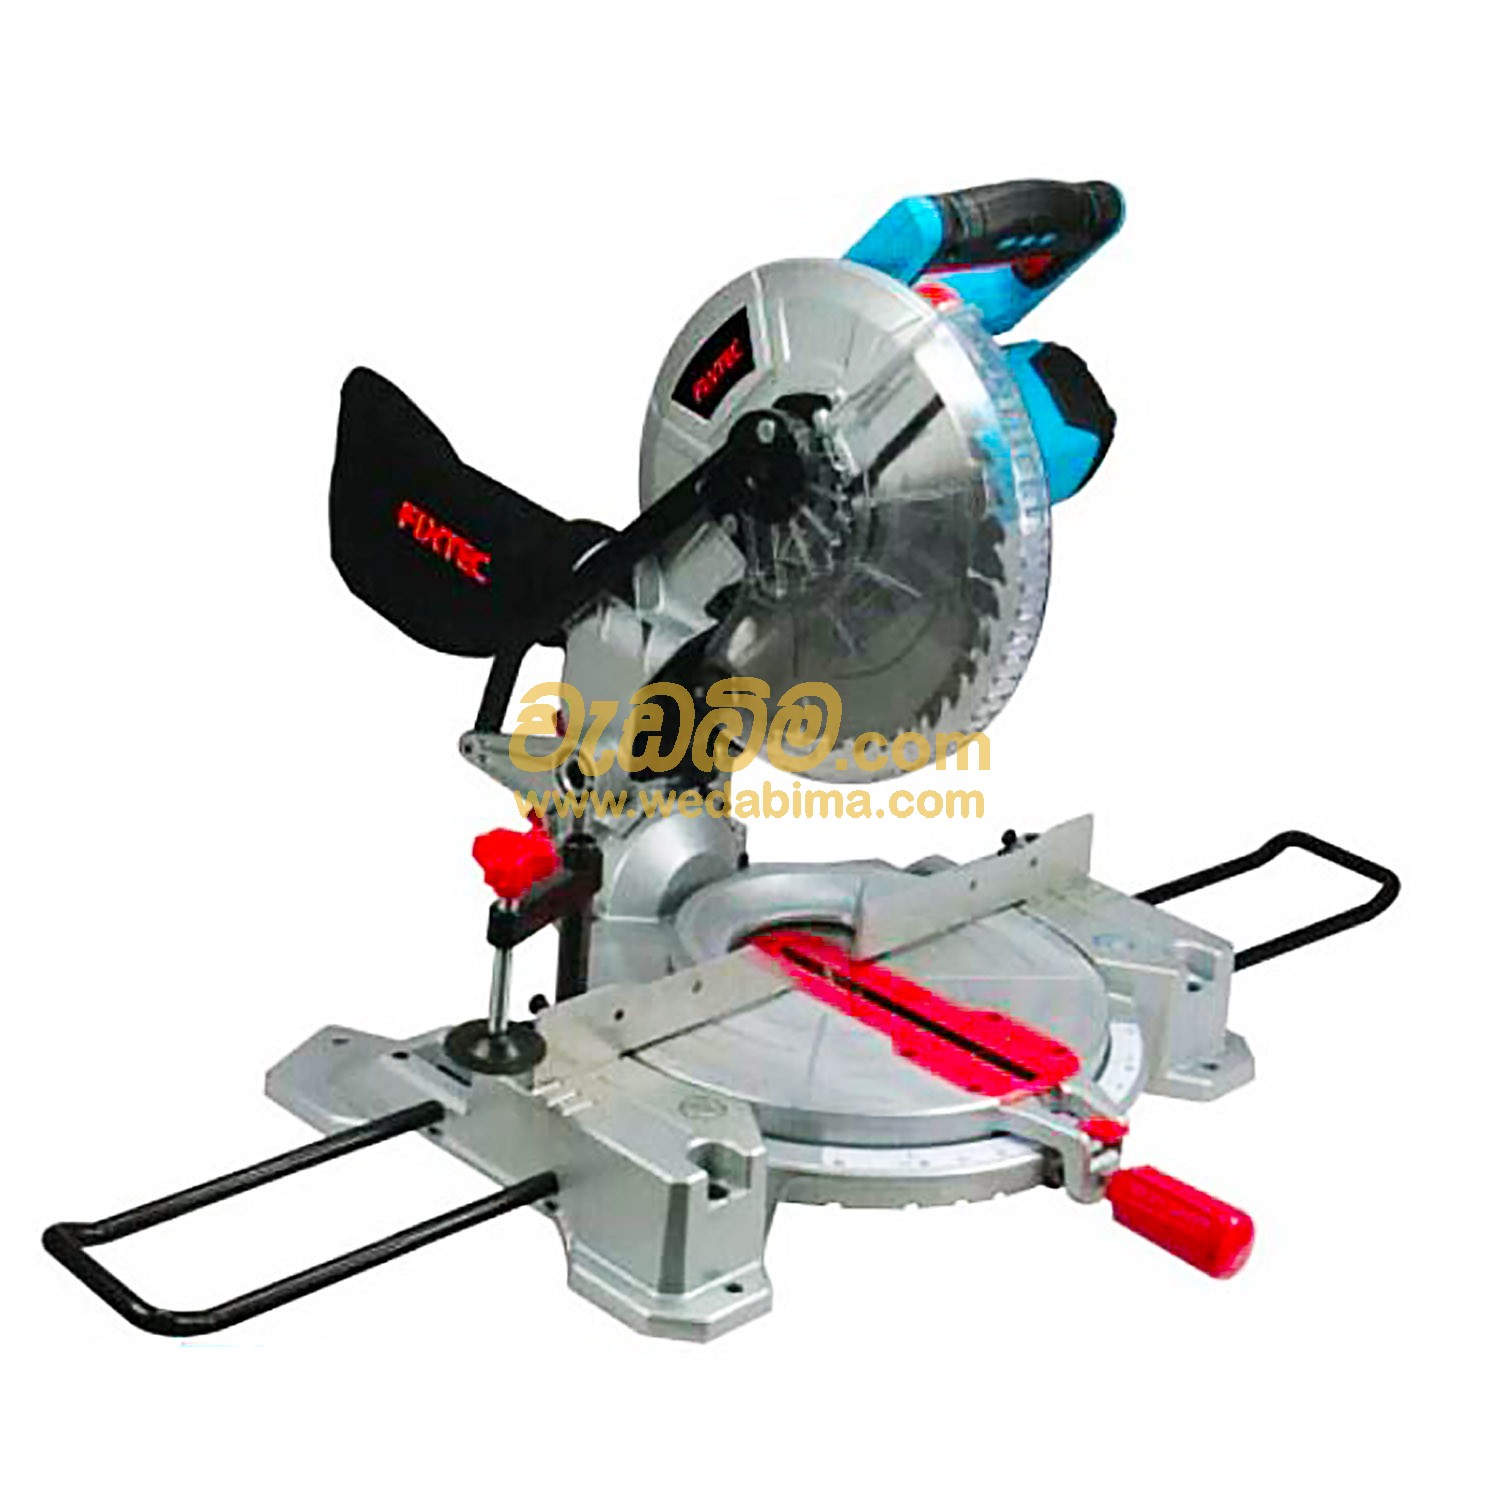 Cover image for Compound Miter Saw